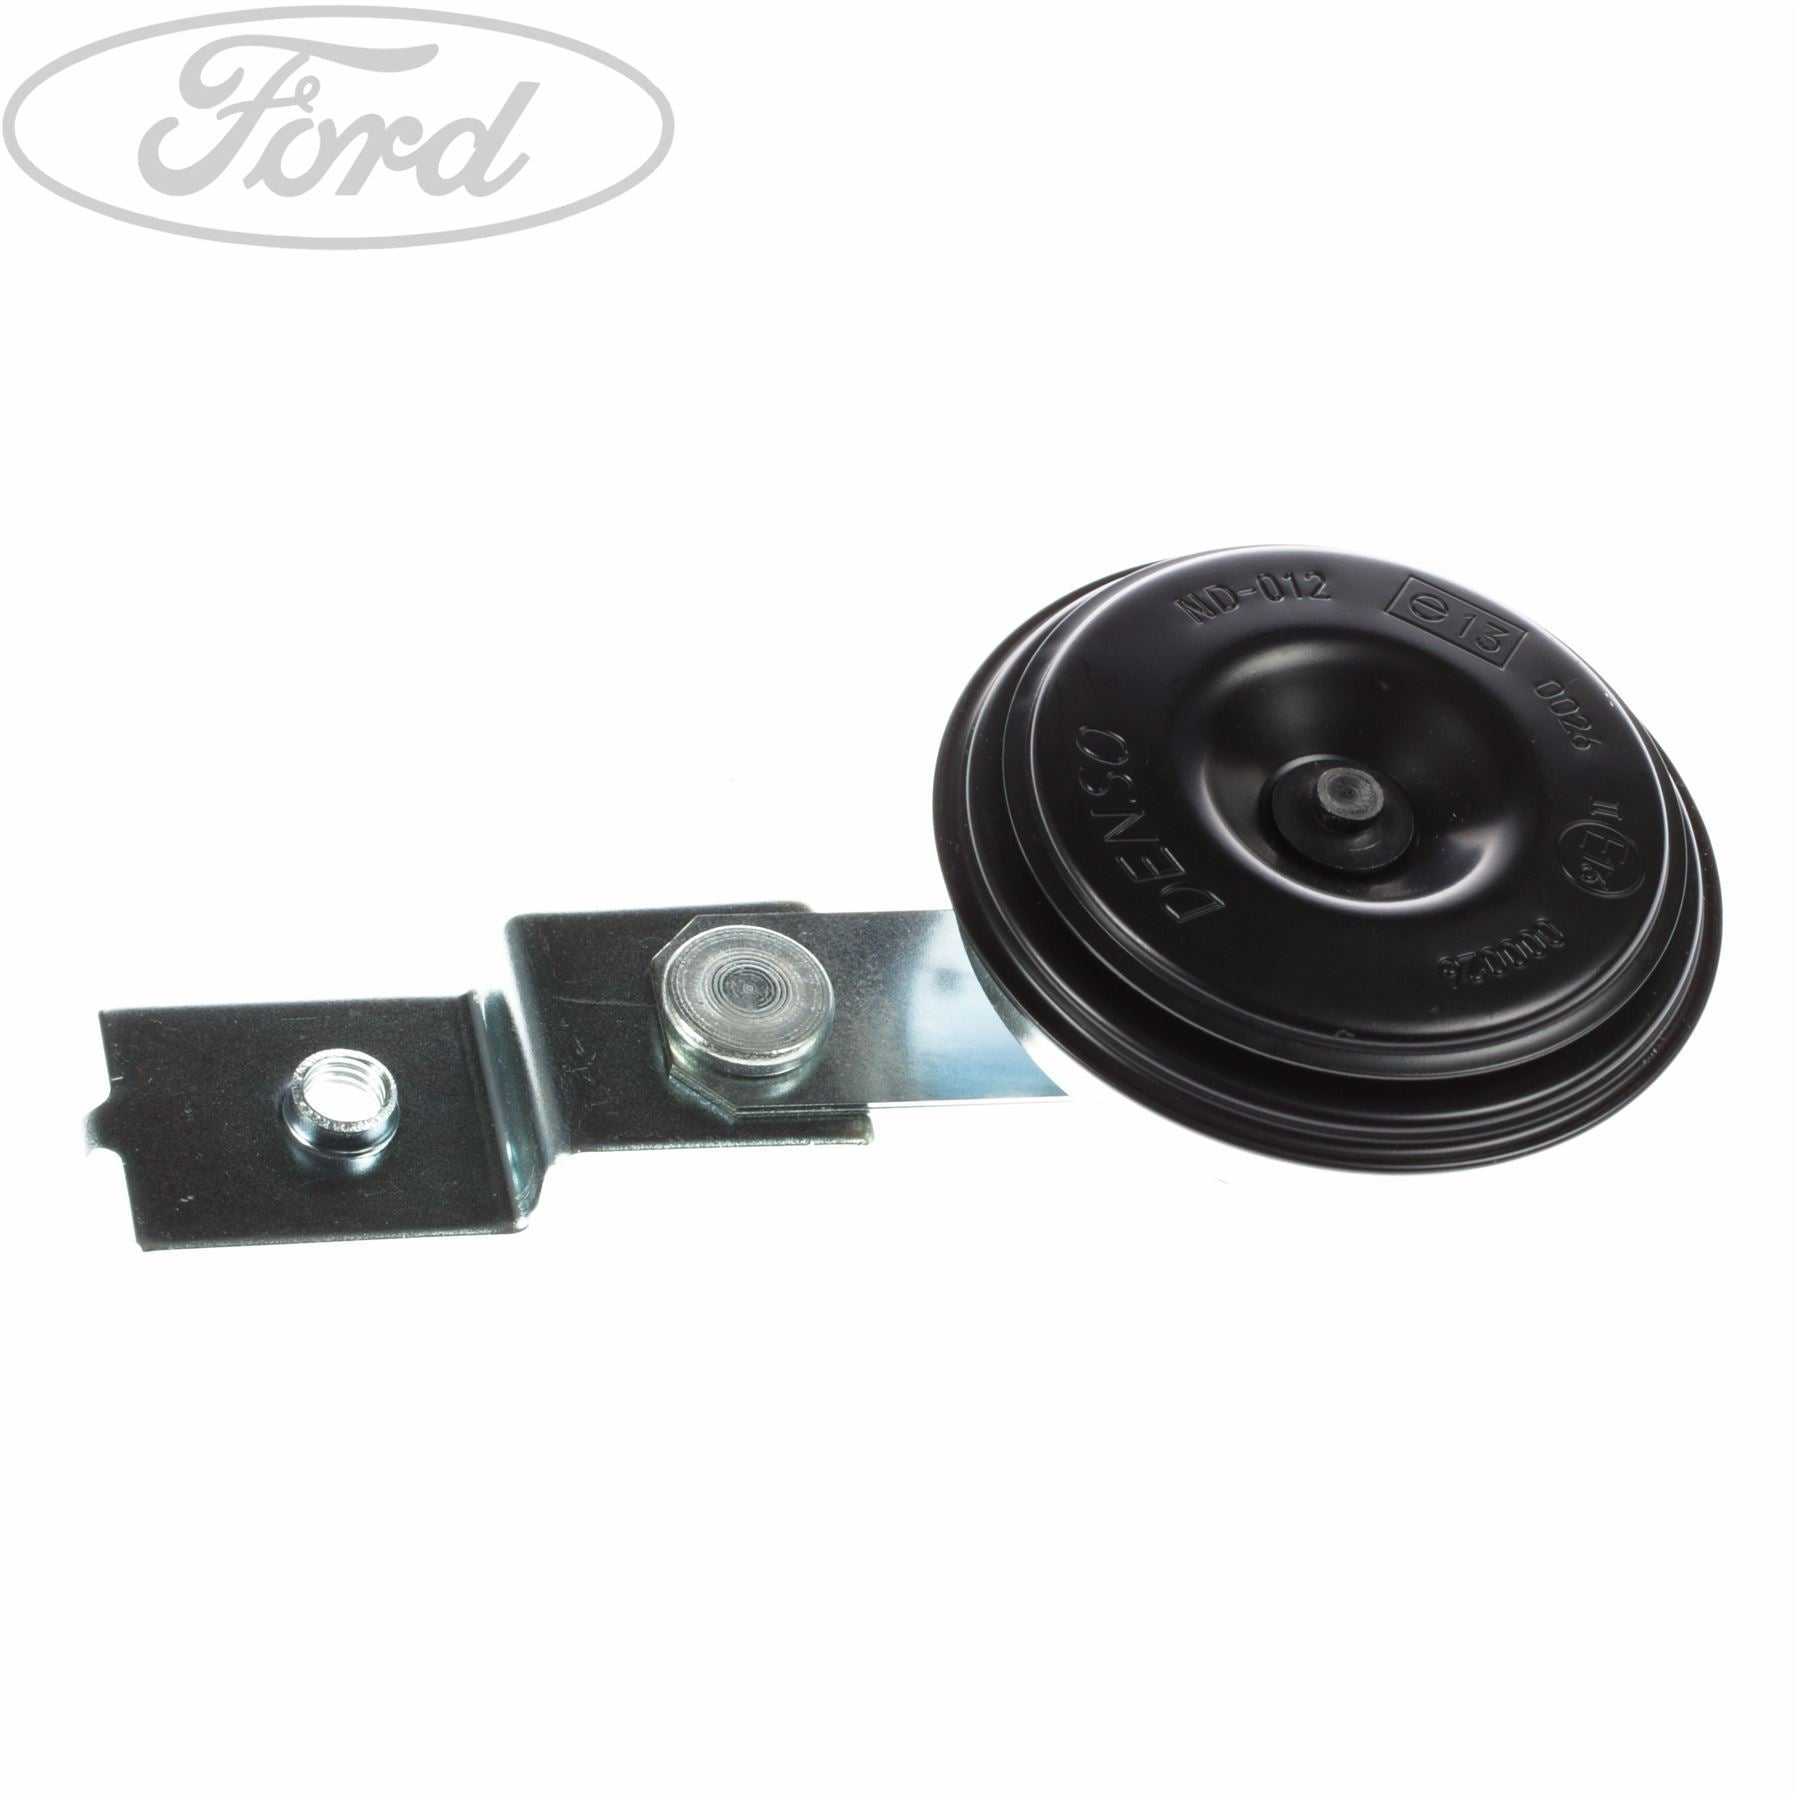 Ford, TRANSIT CONNECT CAR HORN 2002- 2013